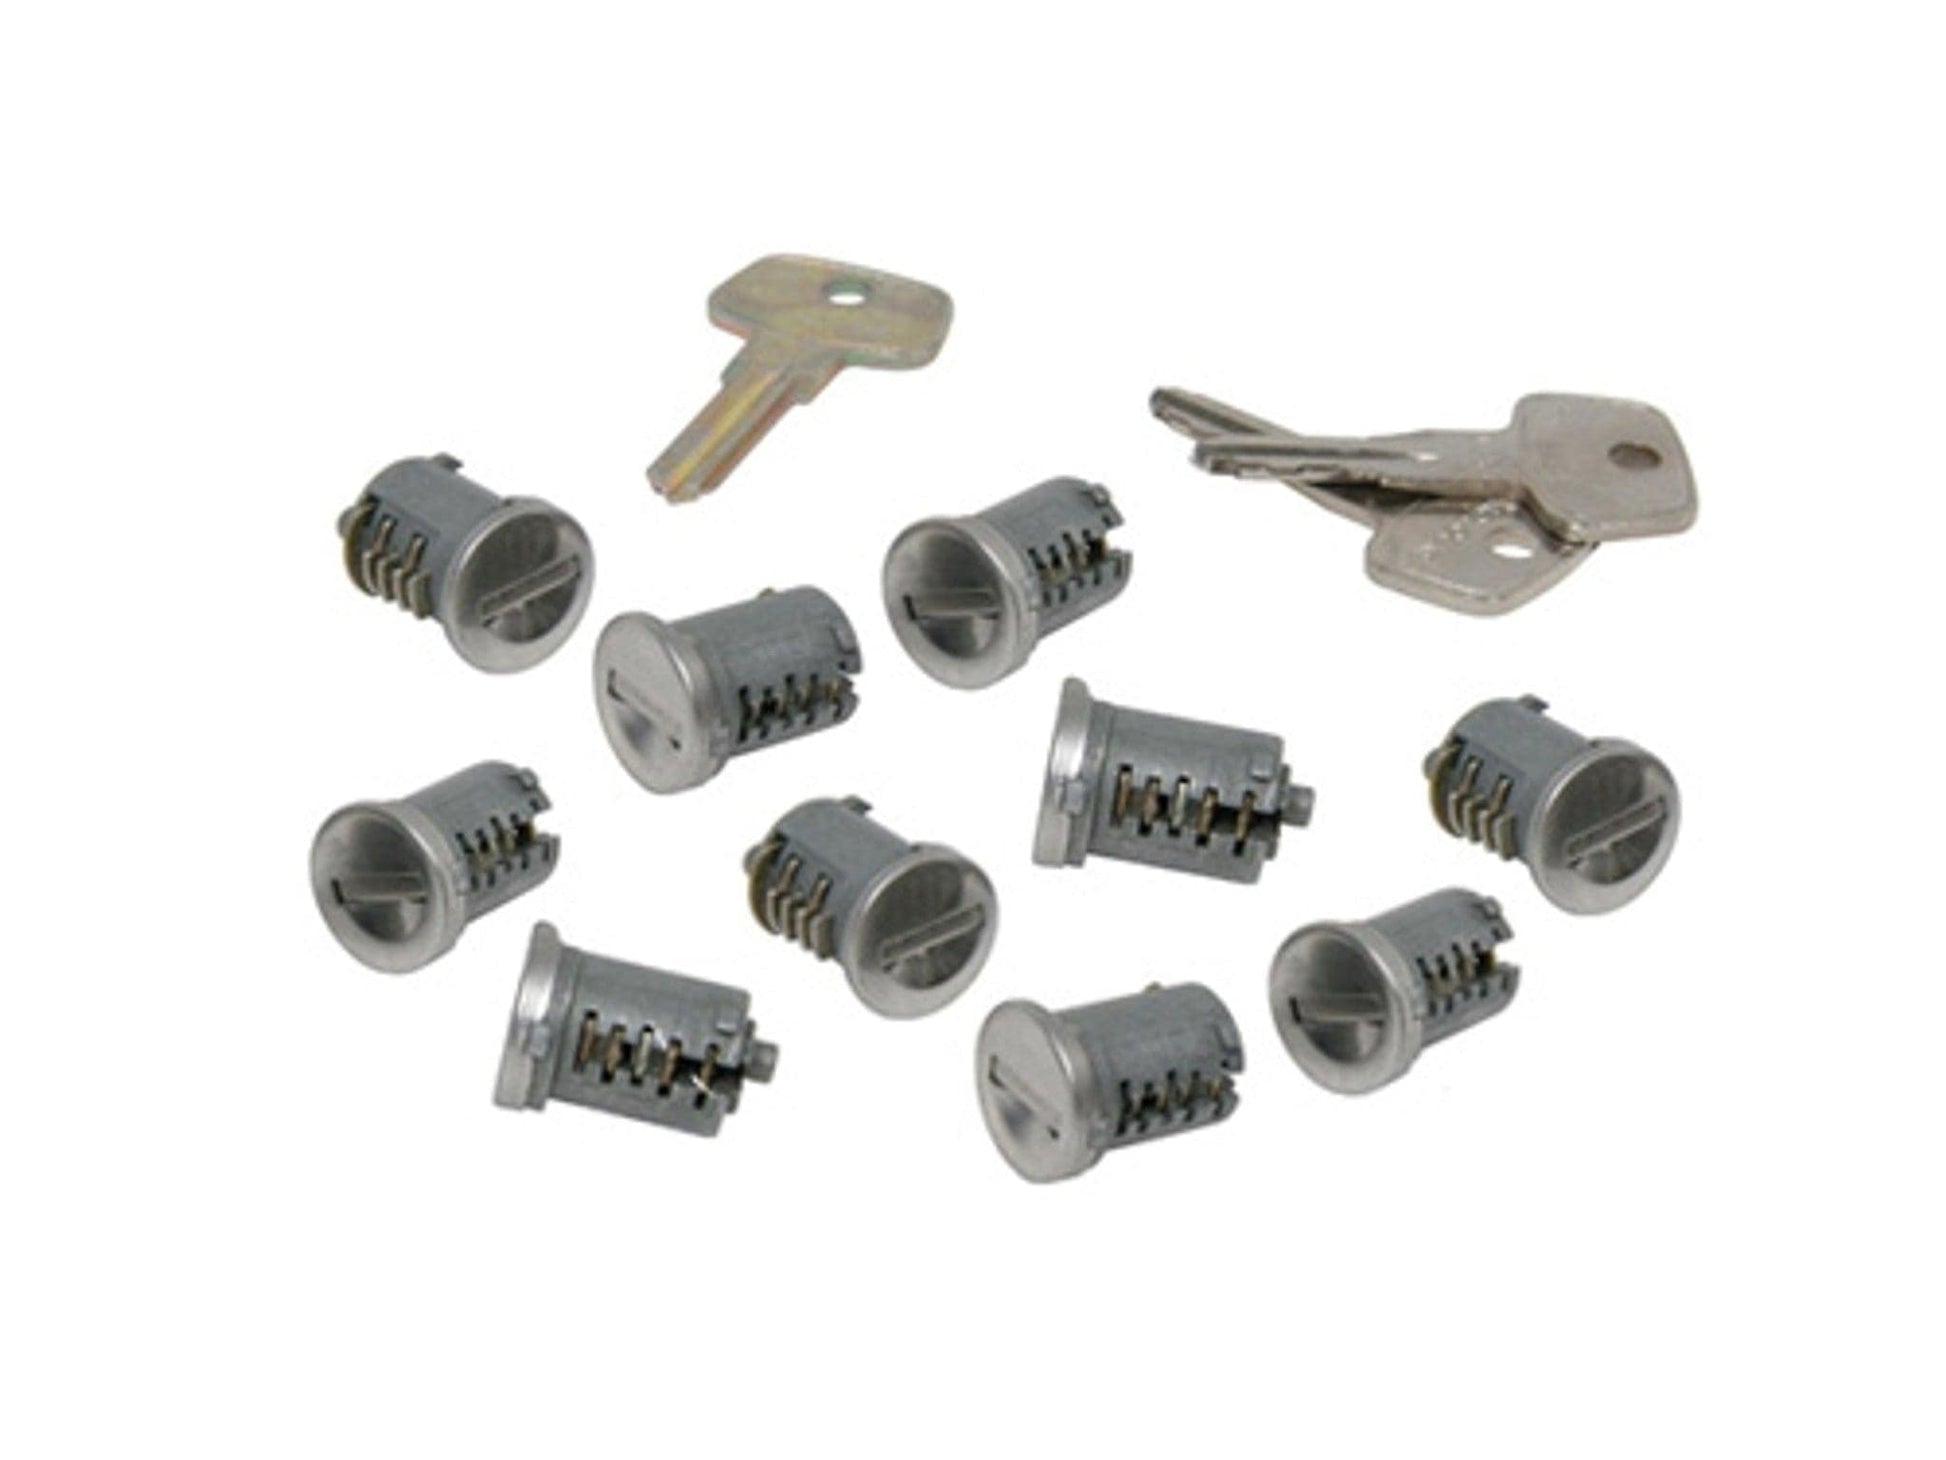 a set of Yakima SKS Lock Cores and keys on a white background.